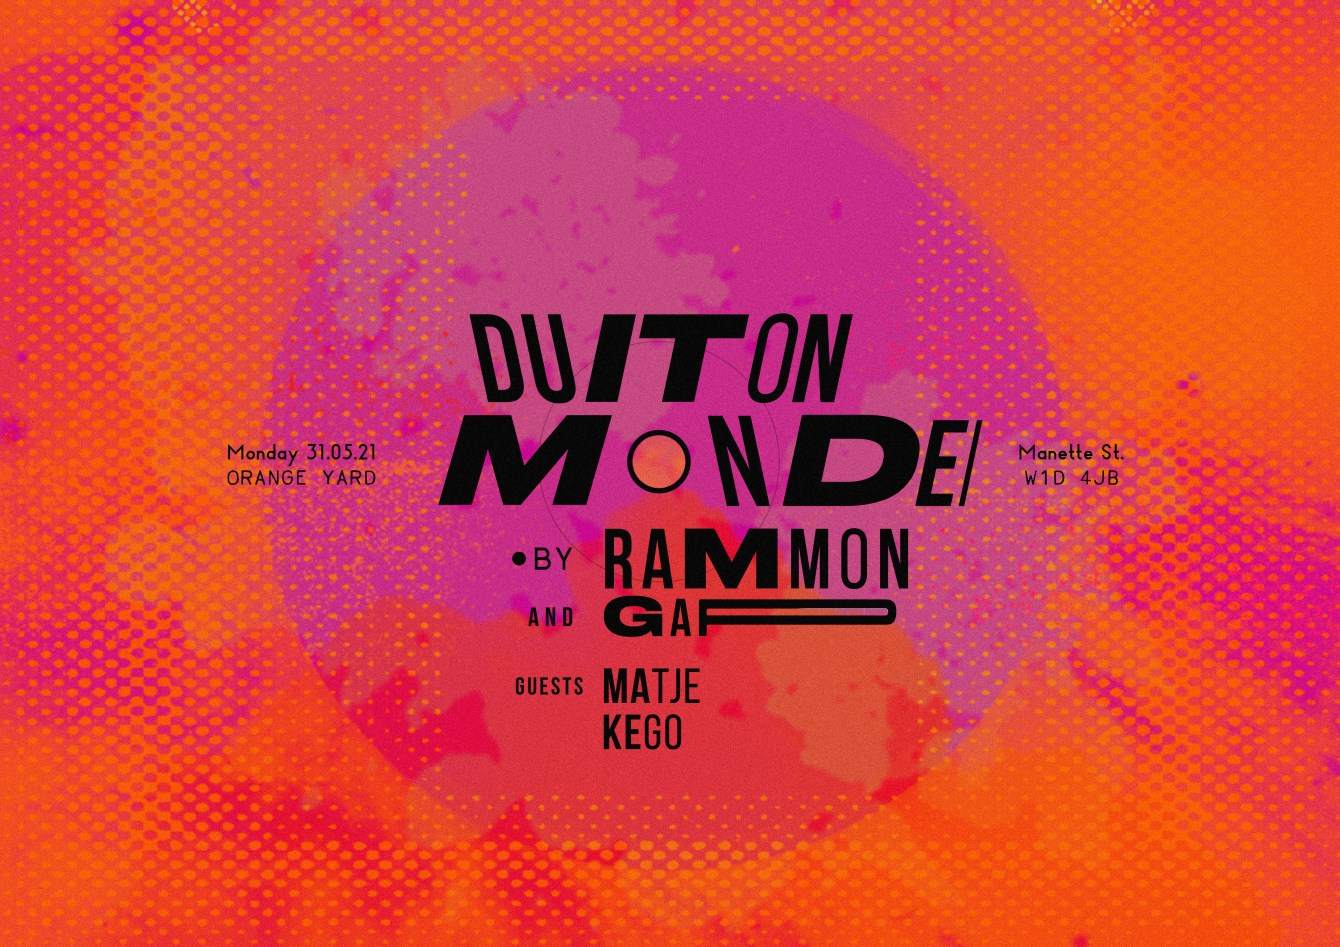 Duit On Mon Dei Special Bank Holiday - フライヤー裏